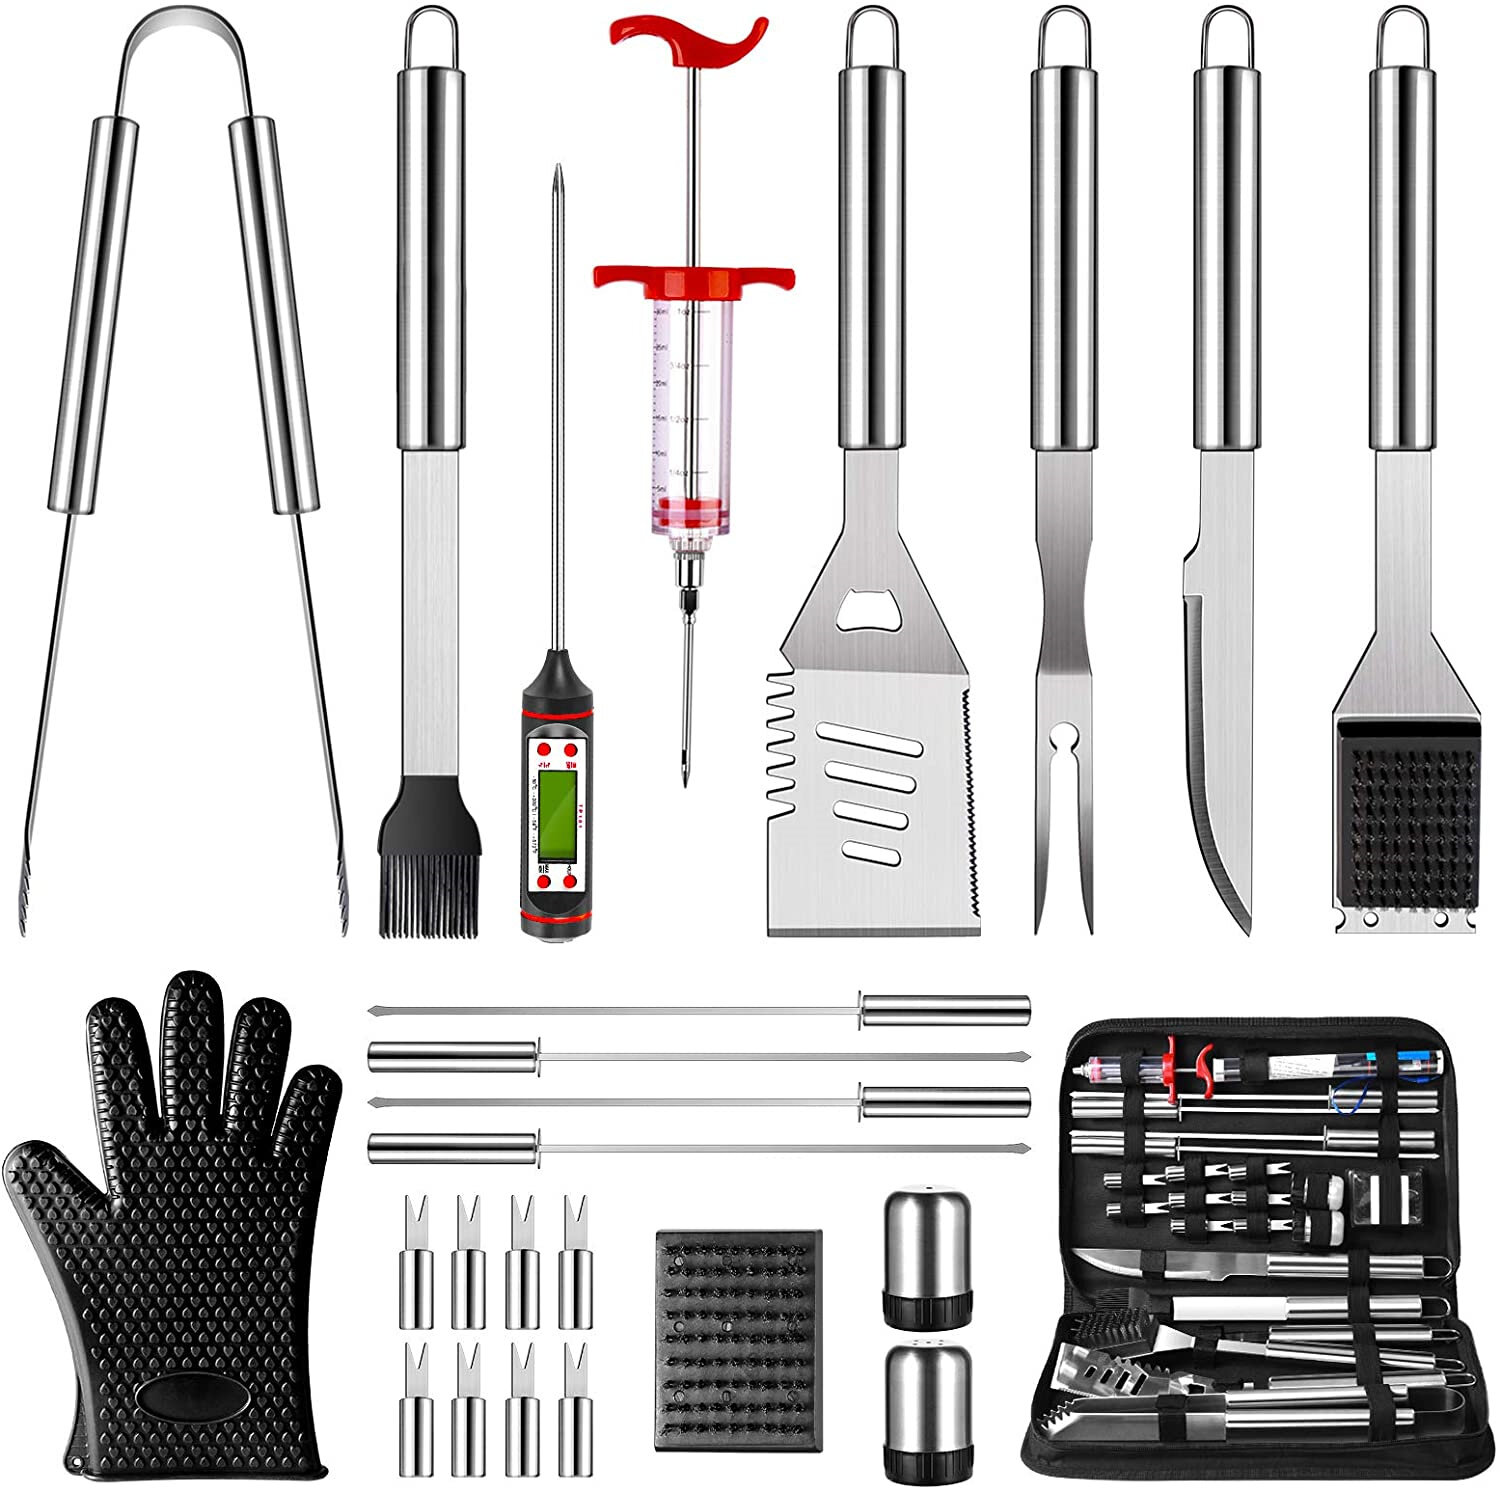 Corona BBQ Grill Tools Set as Heavy Duty Grilling Accessories Barbecue Sets 